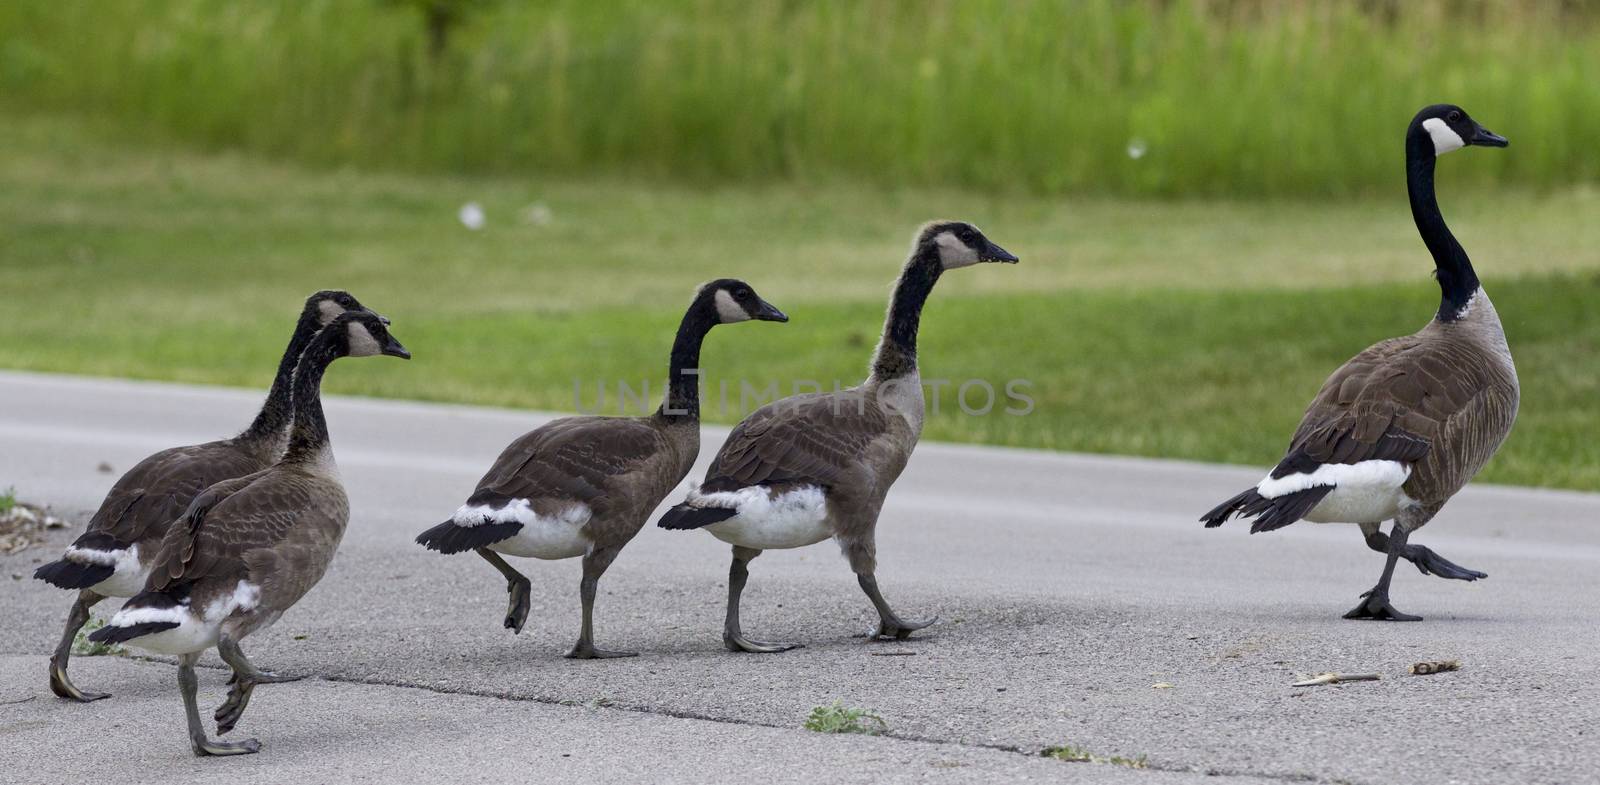 Image with a family of the Canada geese going across the road by teo